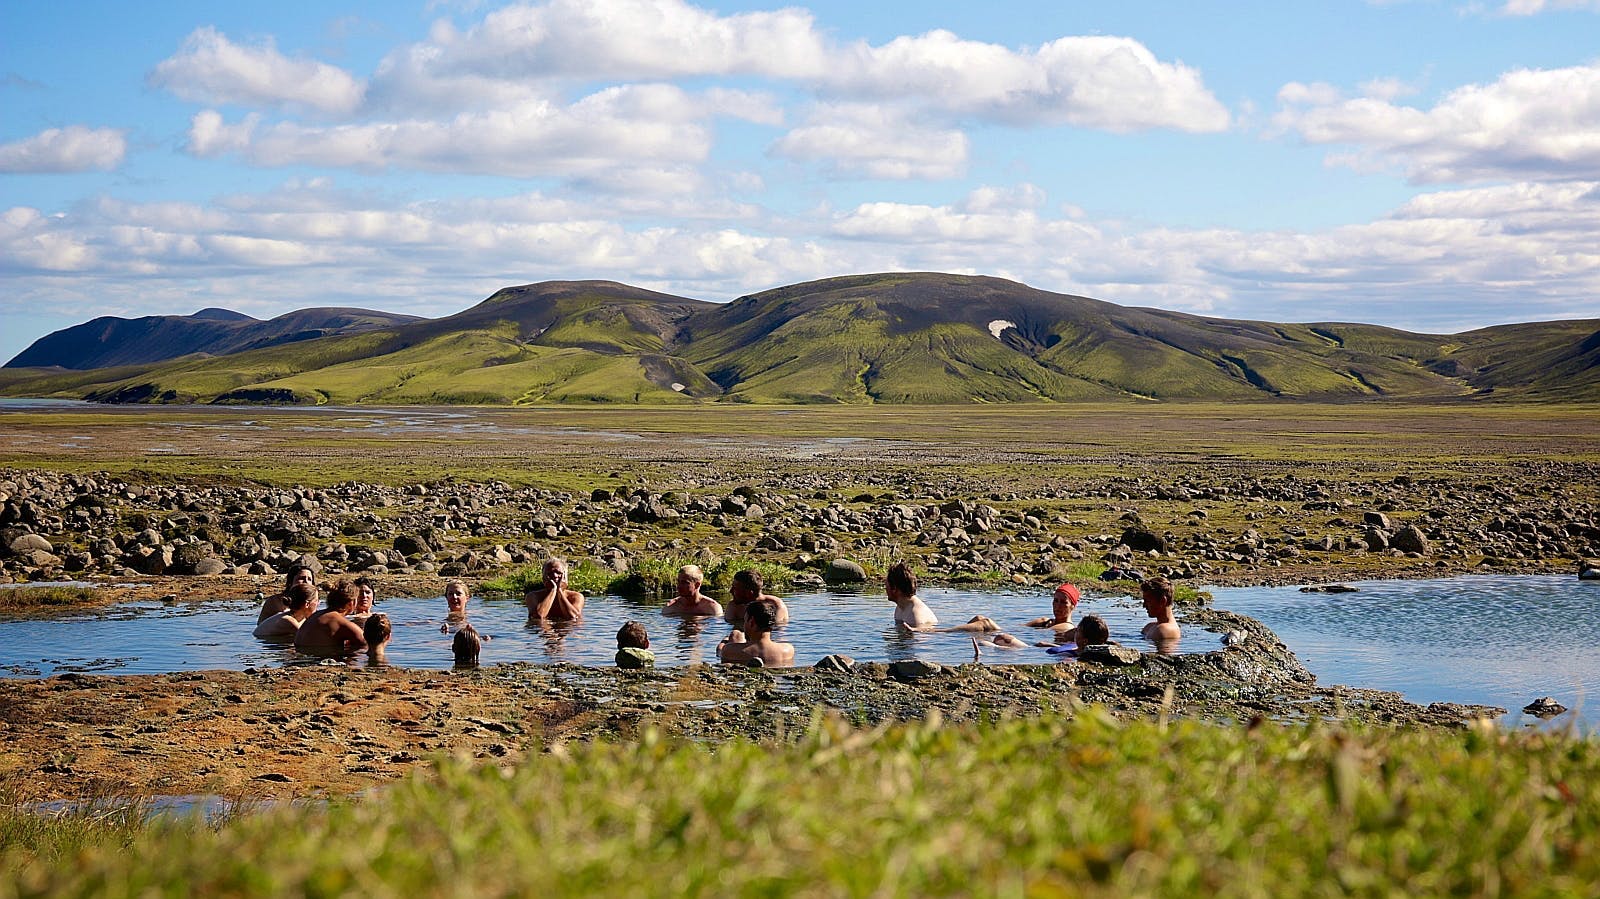 Bathing in the natural hot spring of Strútslaug in the Highlands of Iceland is a popular activity for passing hikers.